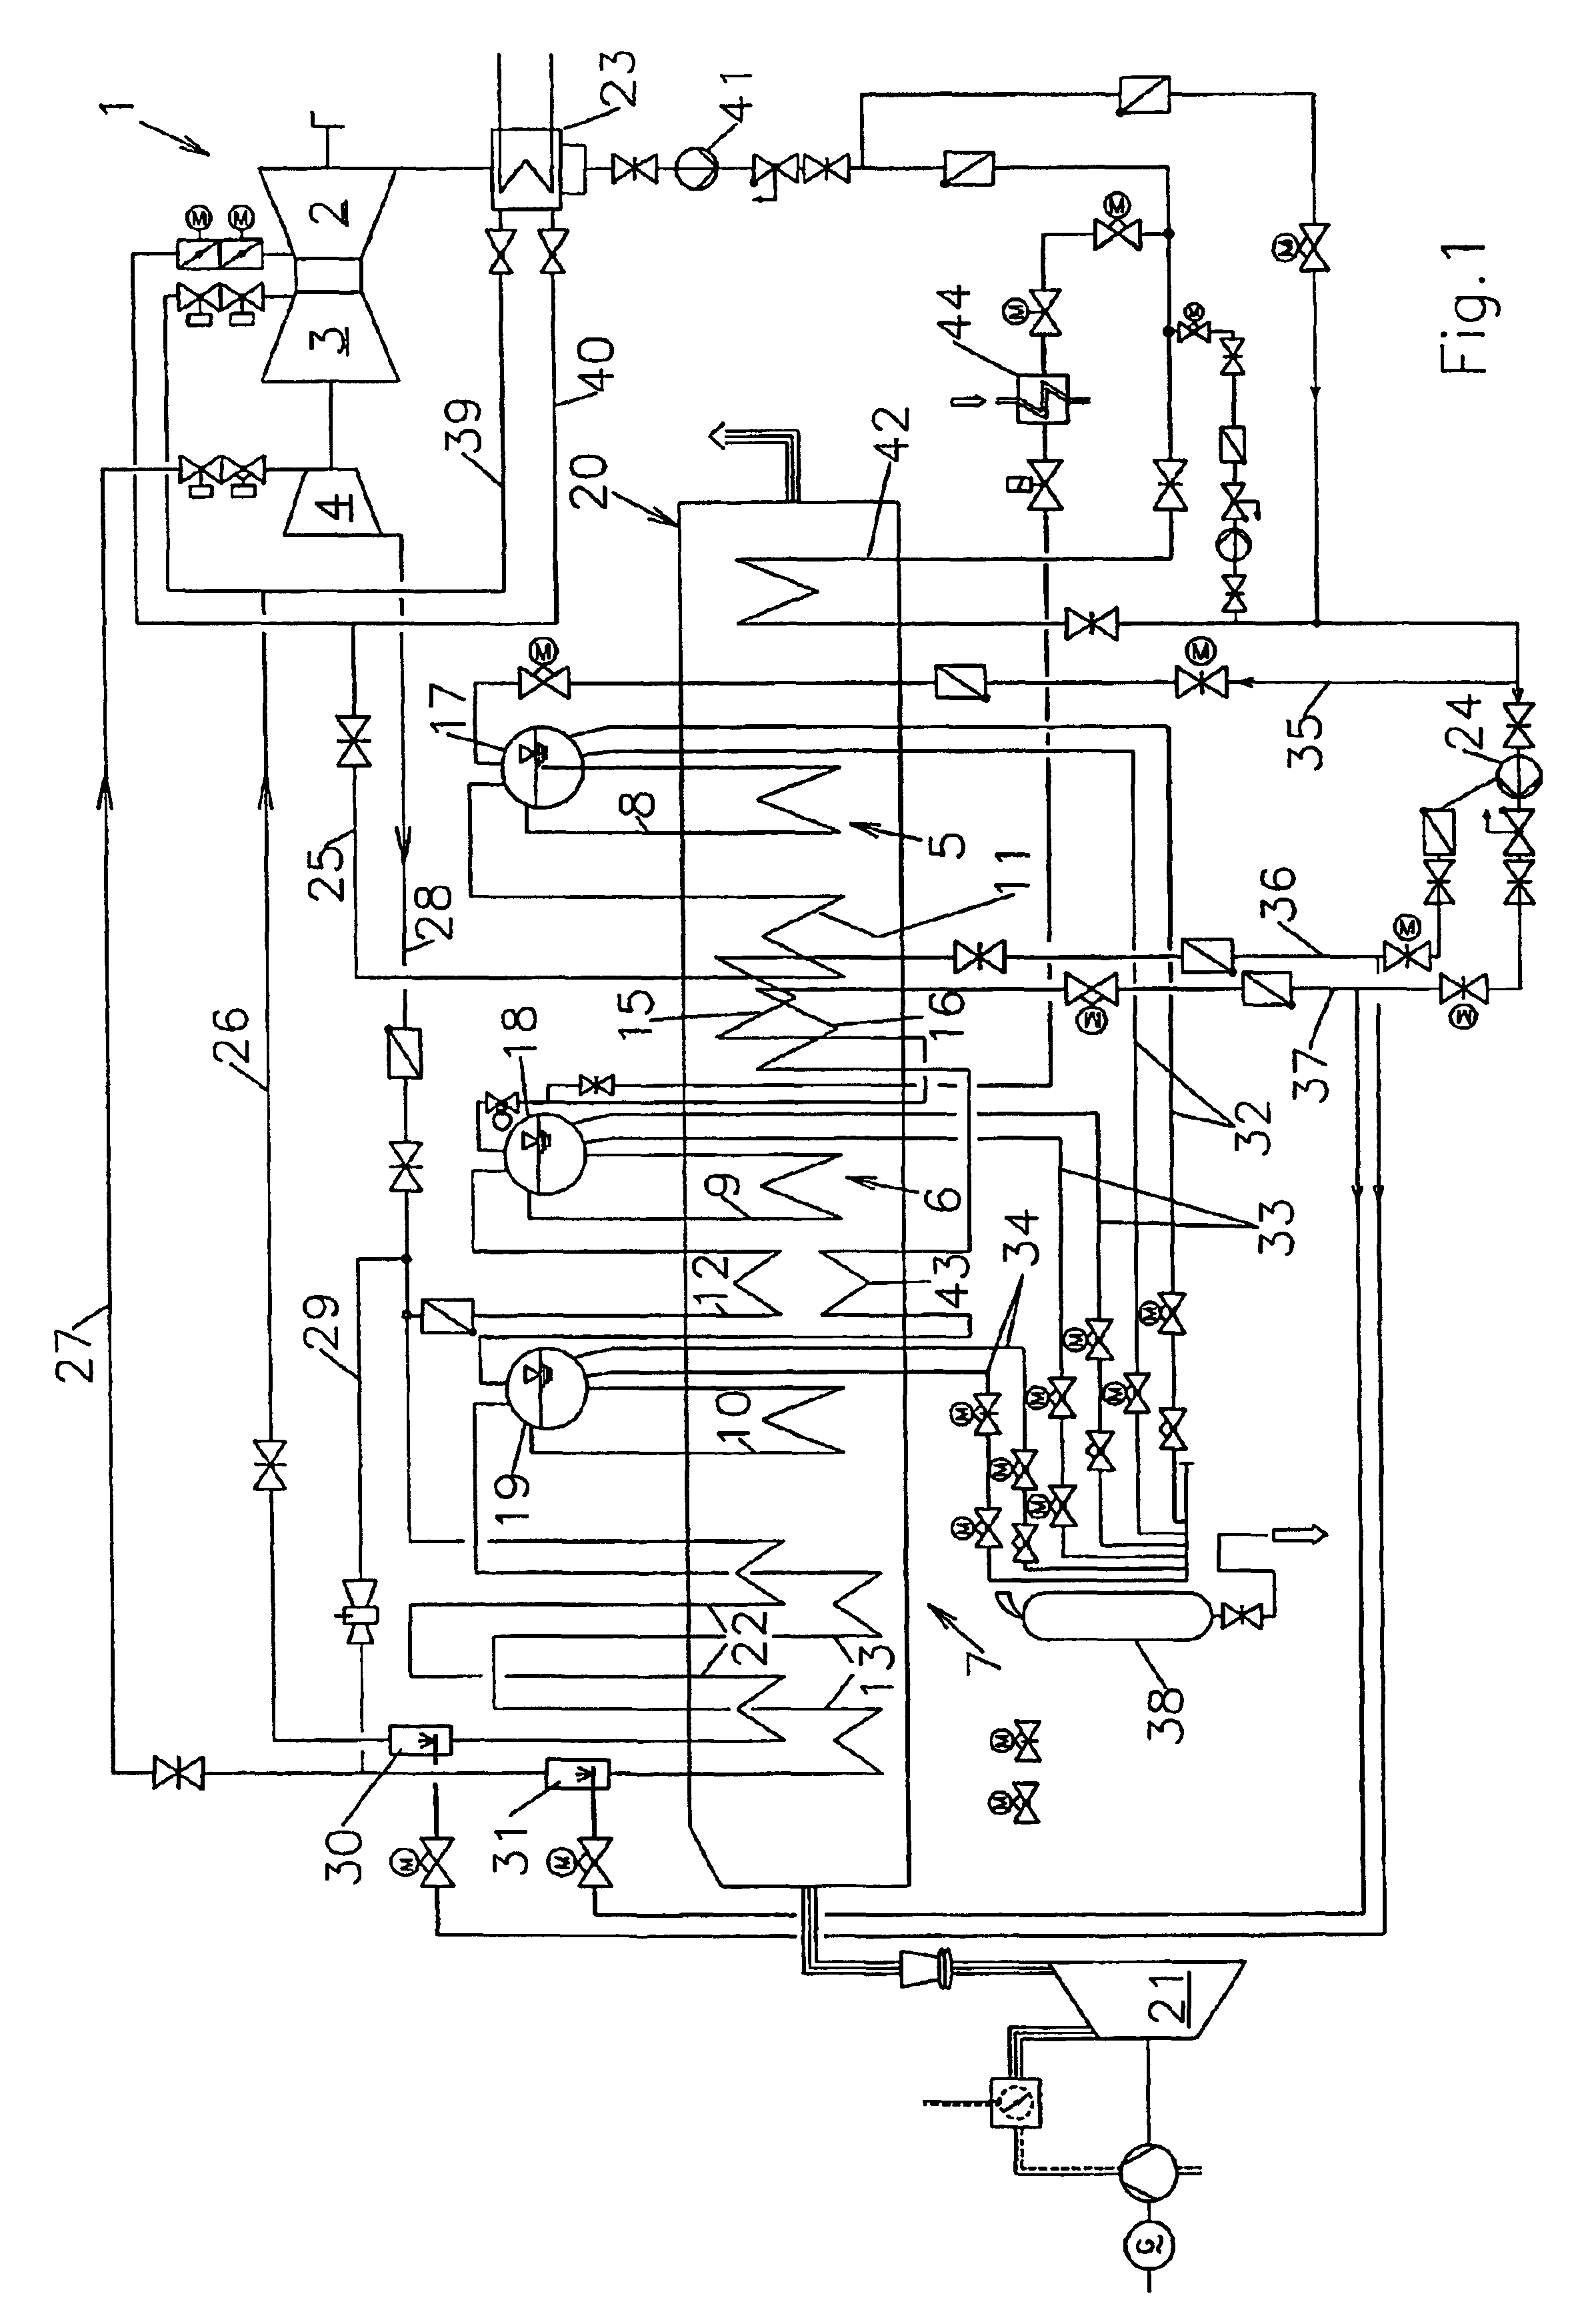 Device and method for preheating combustibles in combined gas and steam turbine installations